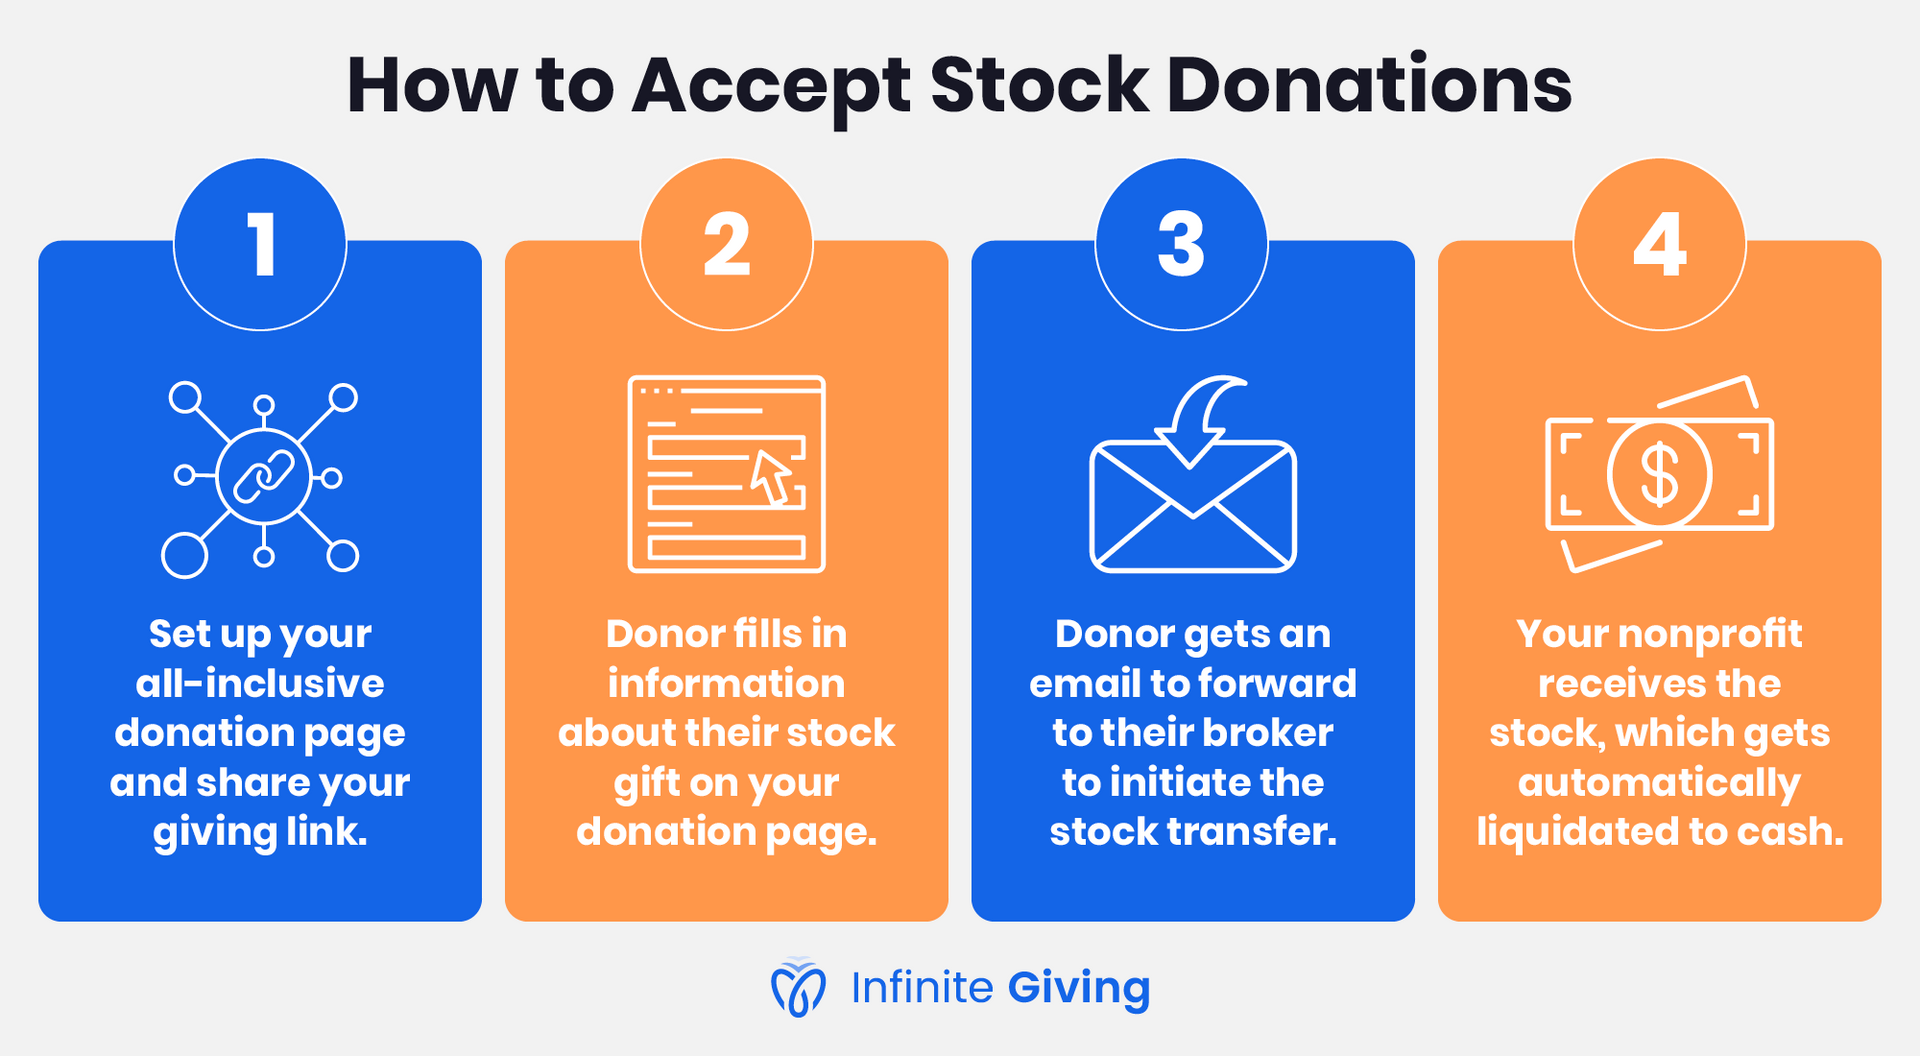 An infographic listing four steps to accept stock donations, also explained in the text below